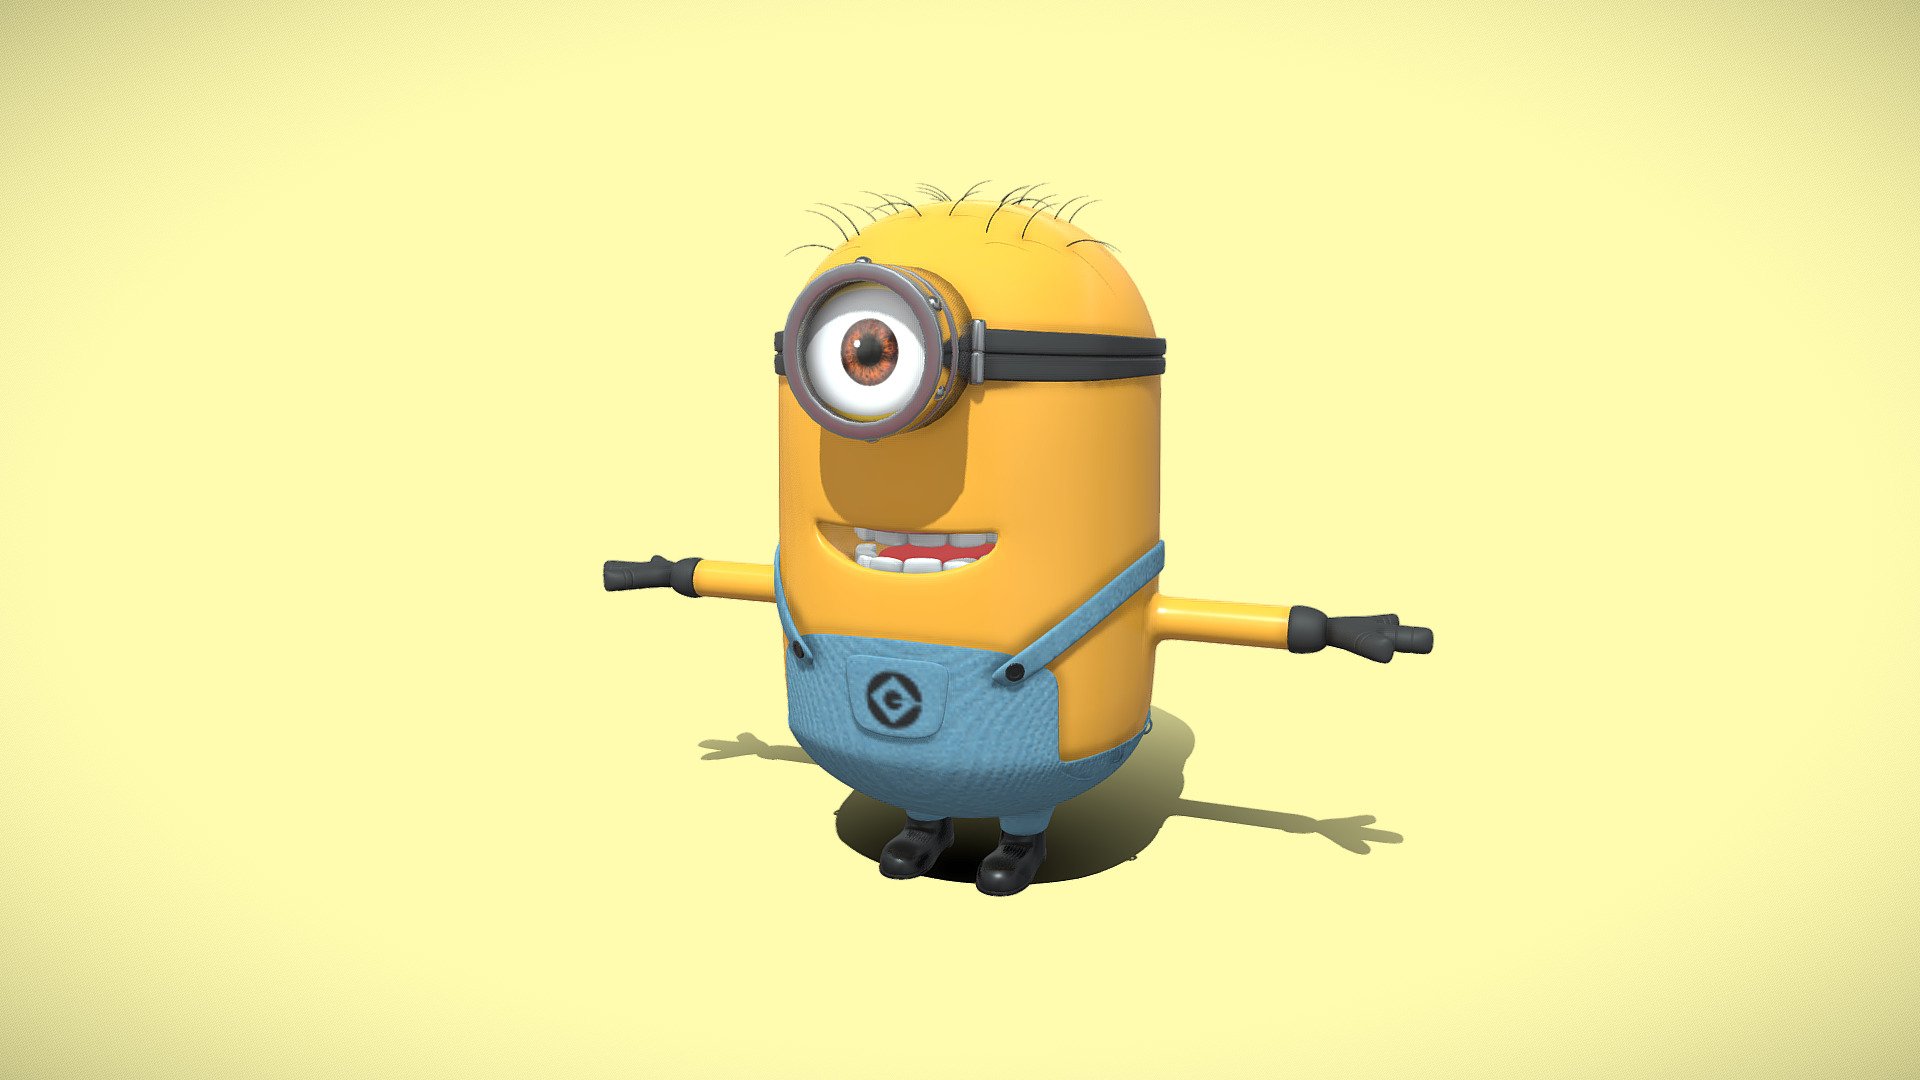 This delightful 3D model brings to life Stuart, one of the iconic Minions from the beloved Despicable Me franchise. Stuart is characterized by his one eye, playful demeanor, and overall charm. The model faithfully captures Stuart's endearing features, including his distinctive goggle-eyed expression, blue overalls, and mischievous grin. Every detail, from the texture of his yellow skin to the stitching on his overalls, is meticulously crafted for a delightful and accurate representation of this beloved animated character. Whether you're a fan of the movies or simply looking to add a touch of whimsy to your 3D projects, Stuart the Minion is sure to bring joy and personality 3d model